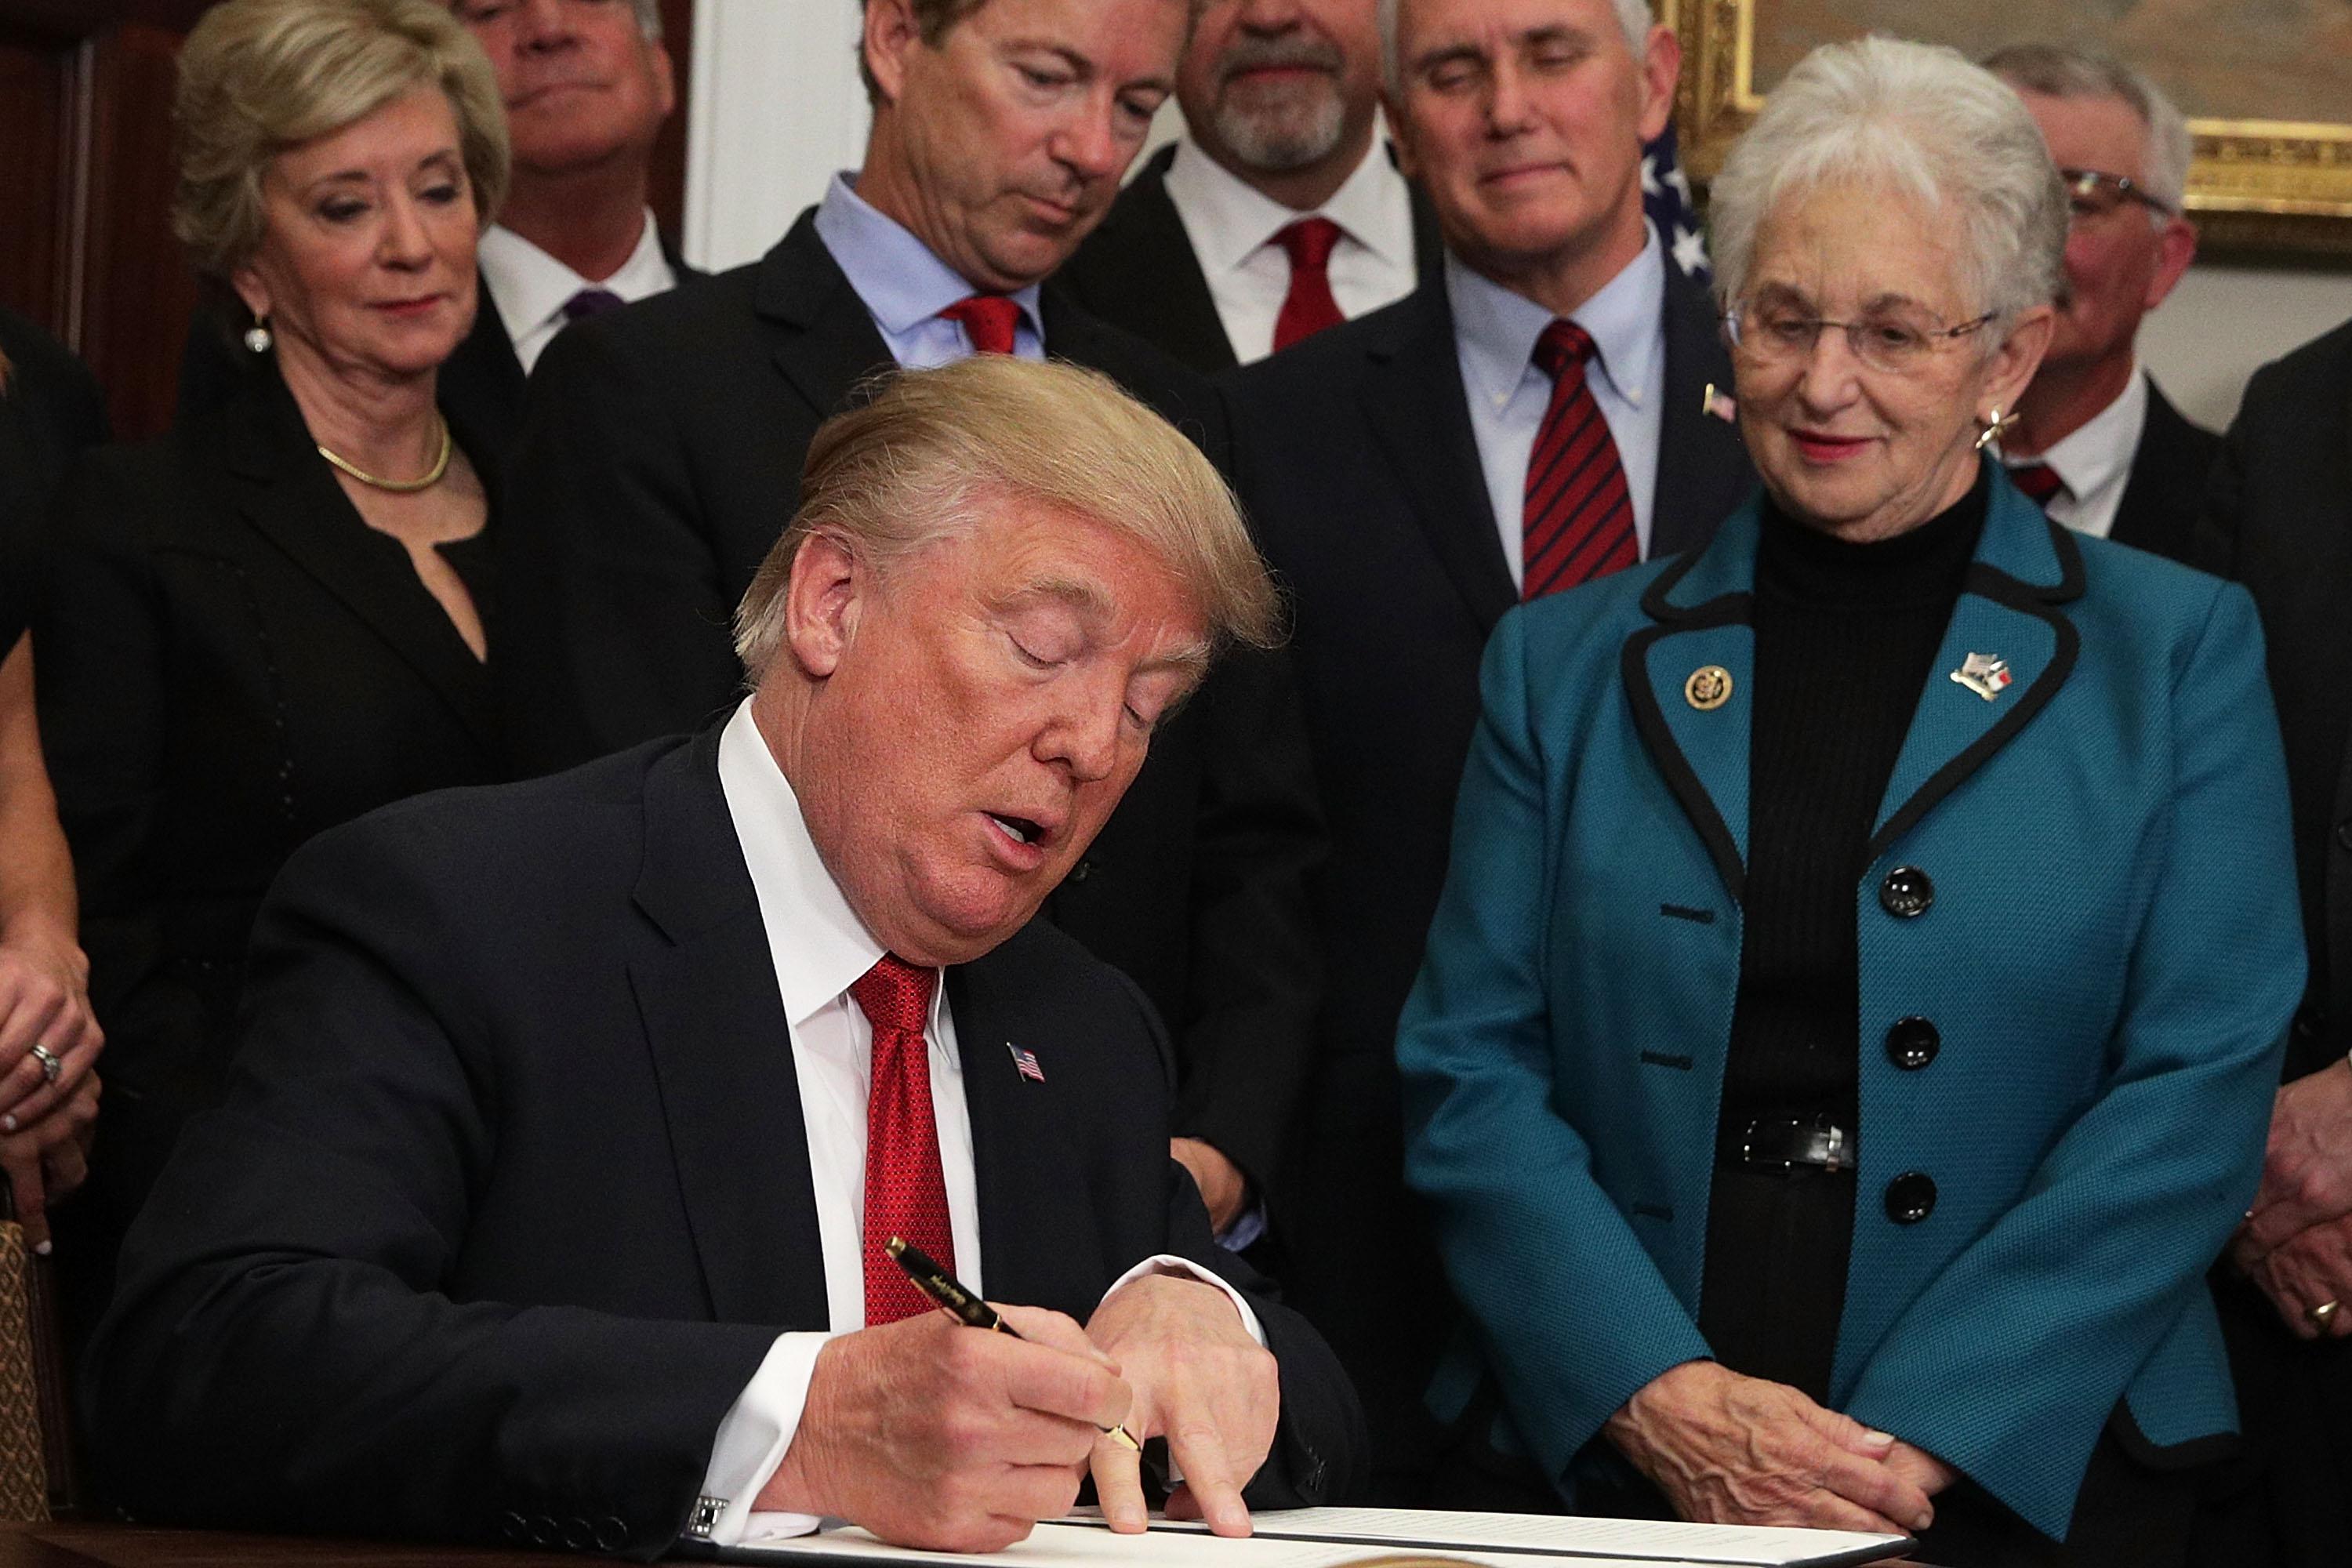 WASHINGTON, DC - OCTOBER 12:  U.S. President Donald Trump signs an executive order as Sen. Rand Paul (R-KY), Vice President Mike Pence, and Rep. Virginia Foxx (R-NC) look on during an event in the Roosevelt Room of the White House October 12, 2017 in Washington, DC. President Trump signed the executive order to loosen restrictions on Affordable Care Act 'to promote healthcare choice and competition.'  (Photo by Alex Wong/Getty Images)